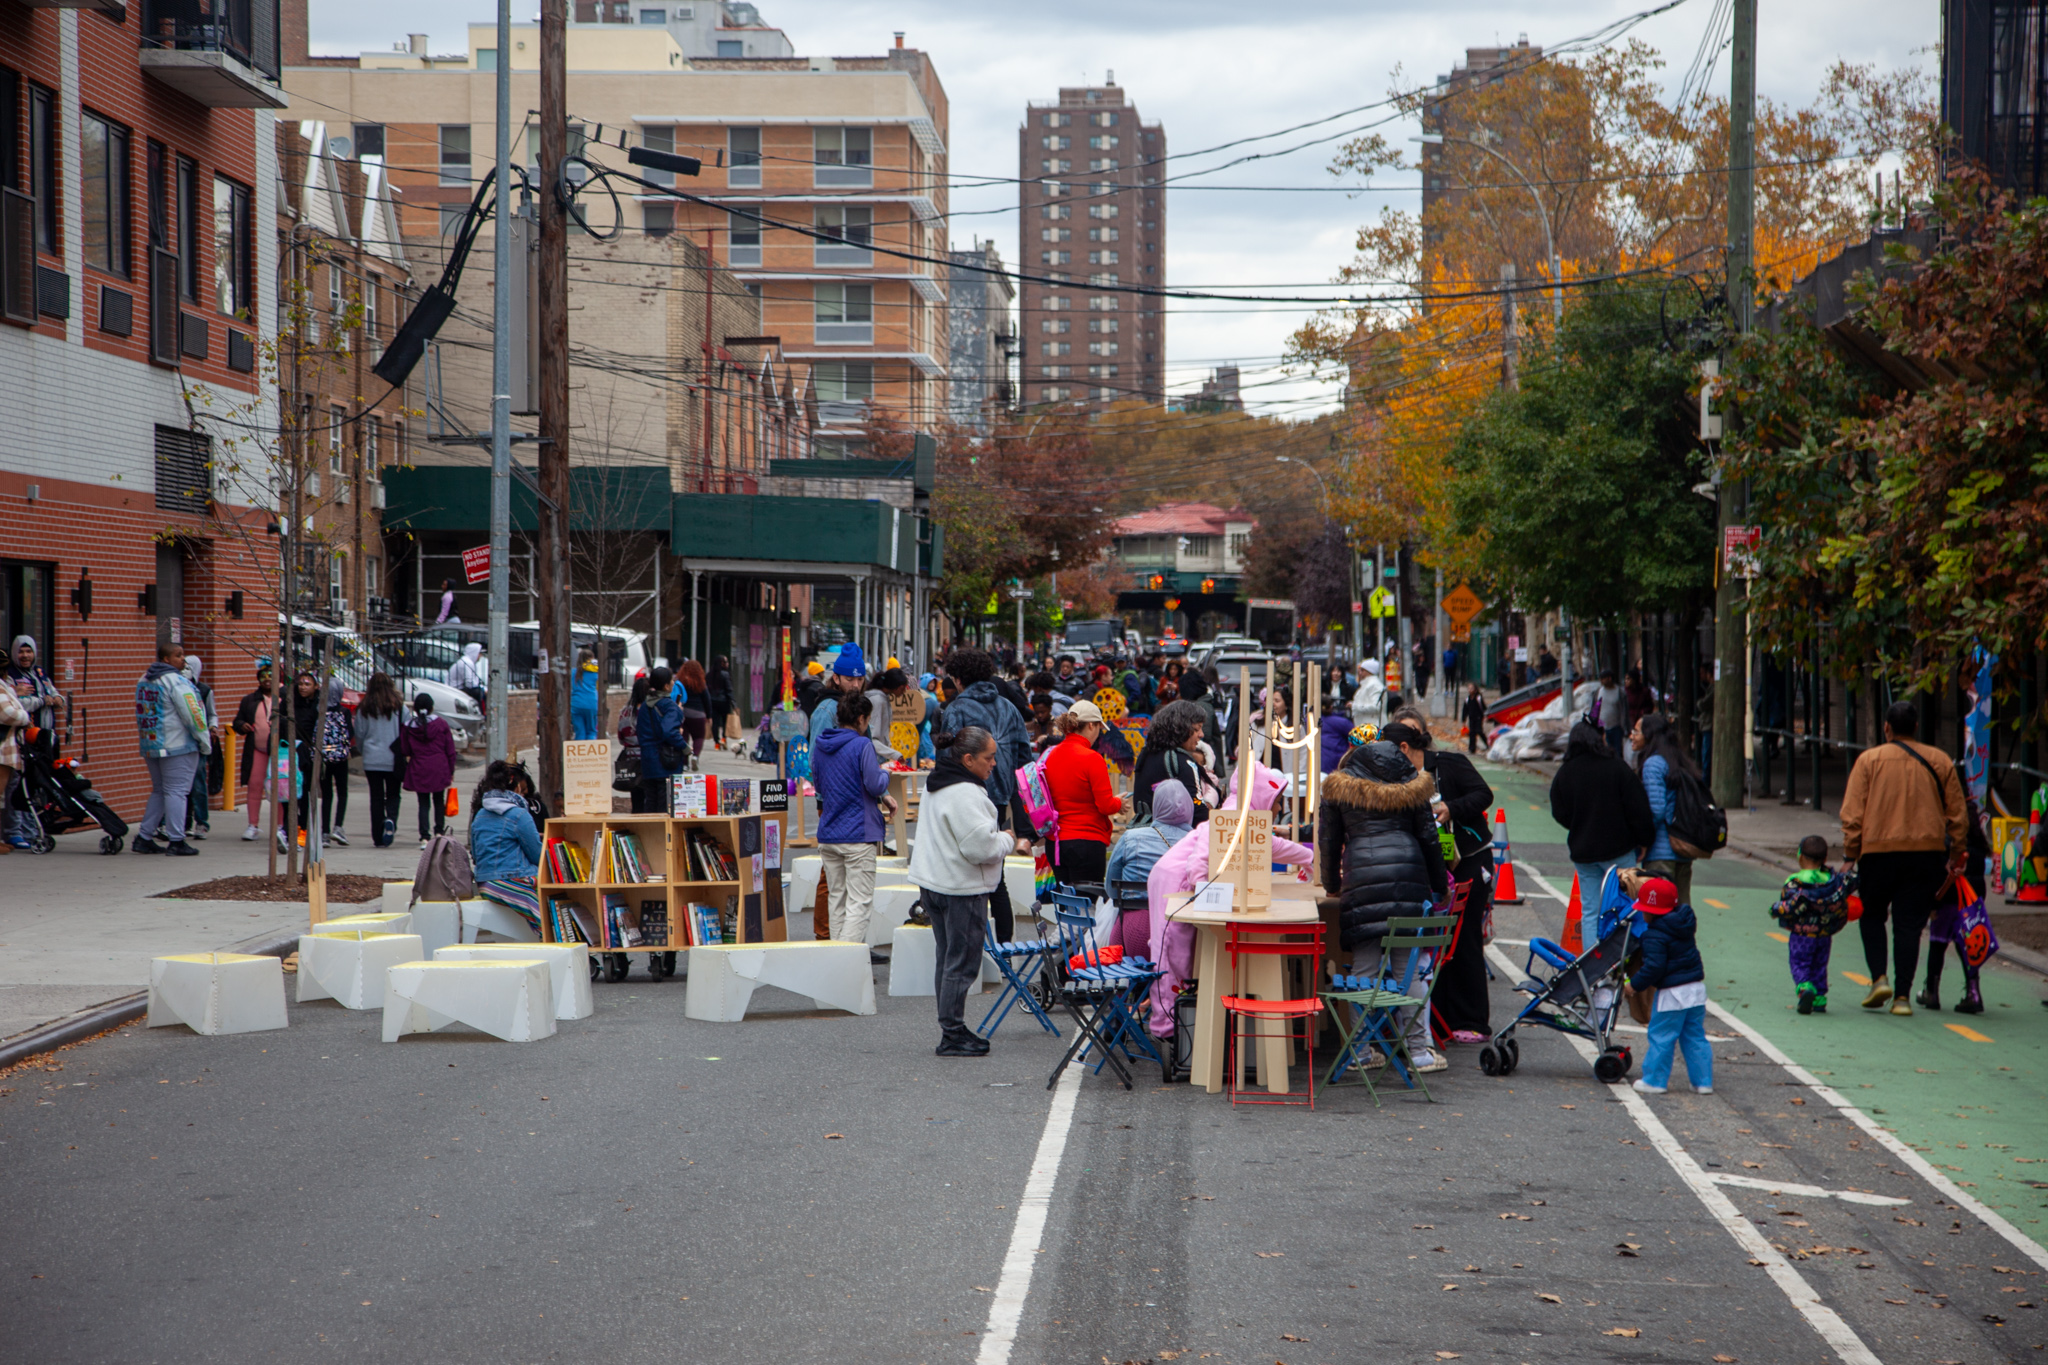 A view of a car-free open street in the Bronx, NYC on Halloween Day.